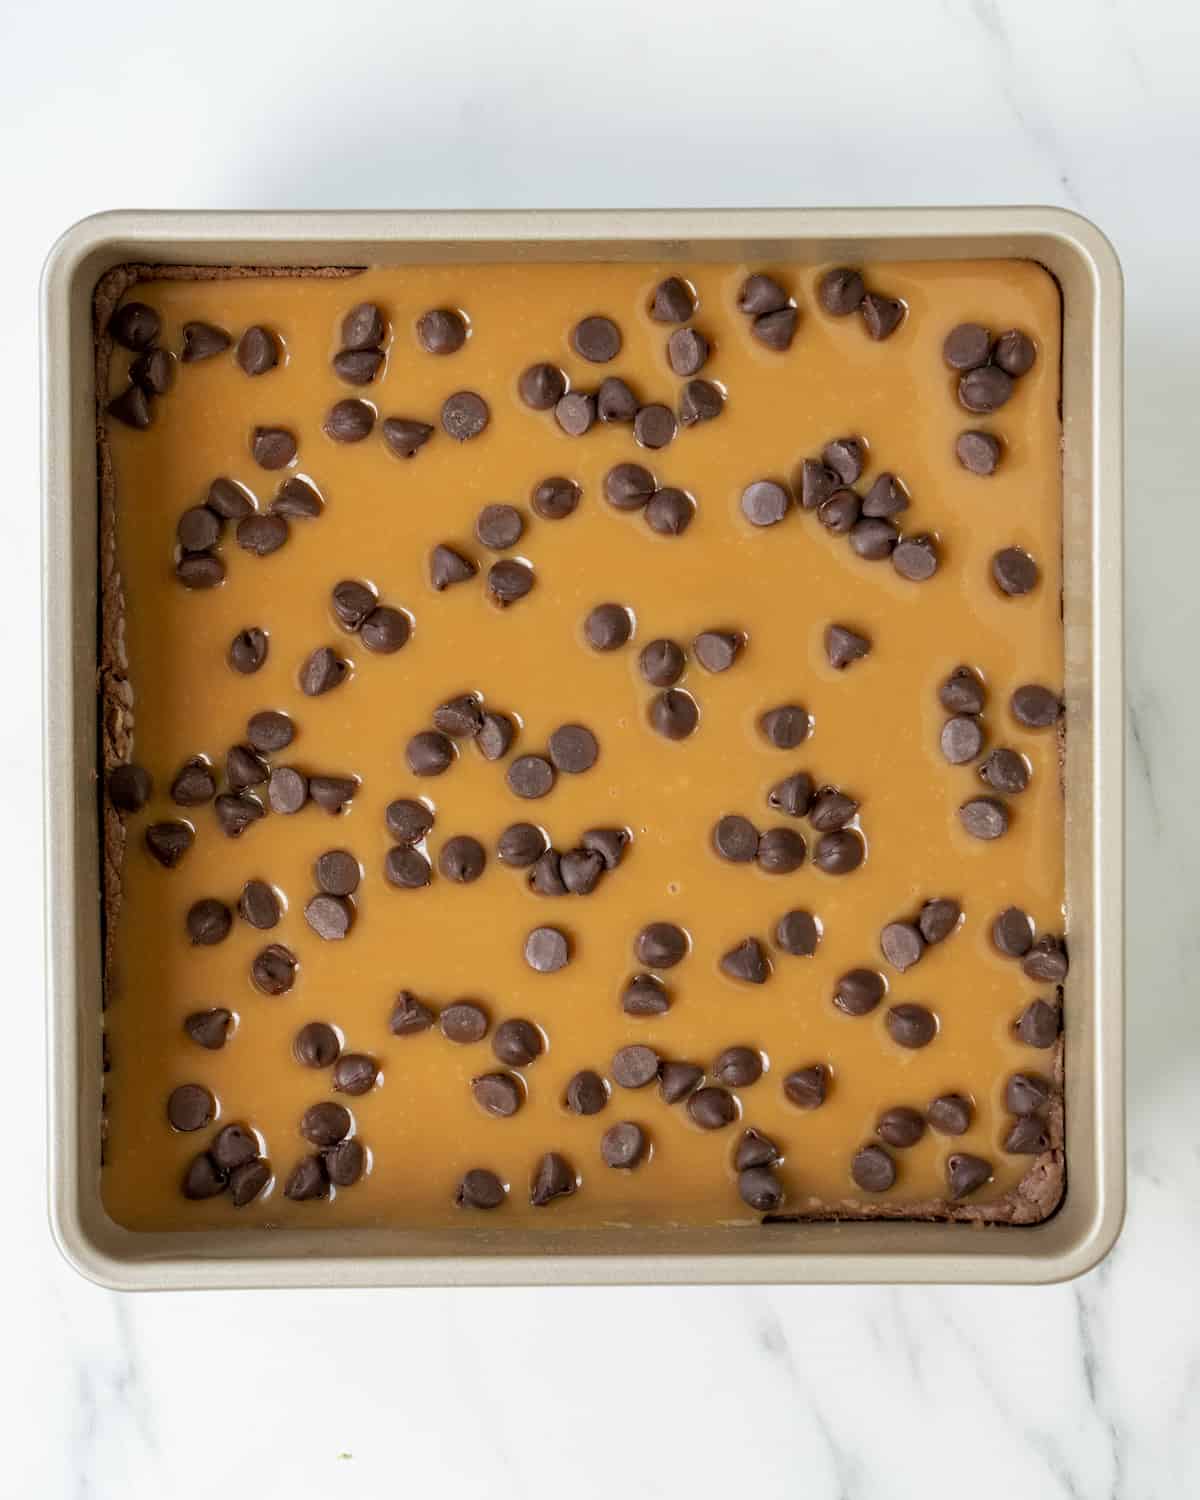 Chocolate chips have been sprinkled on top of the layer of caramels in the square baking pan.  